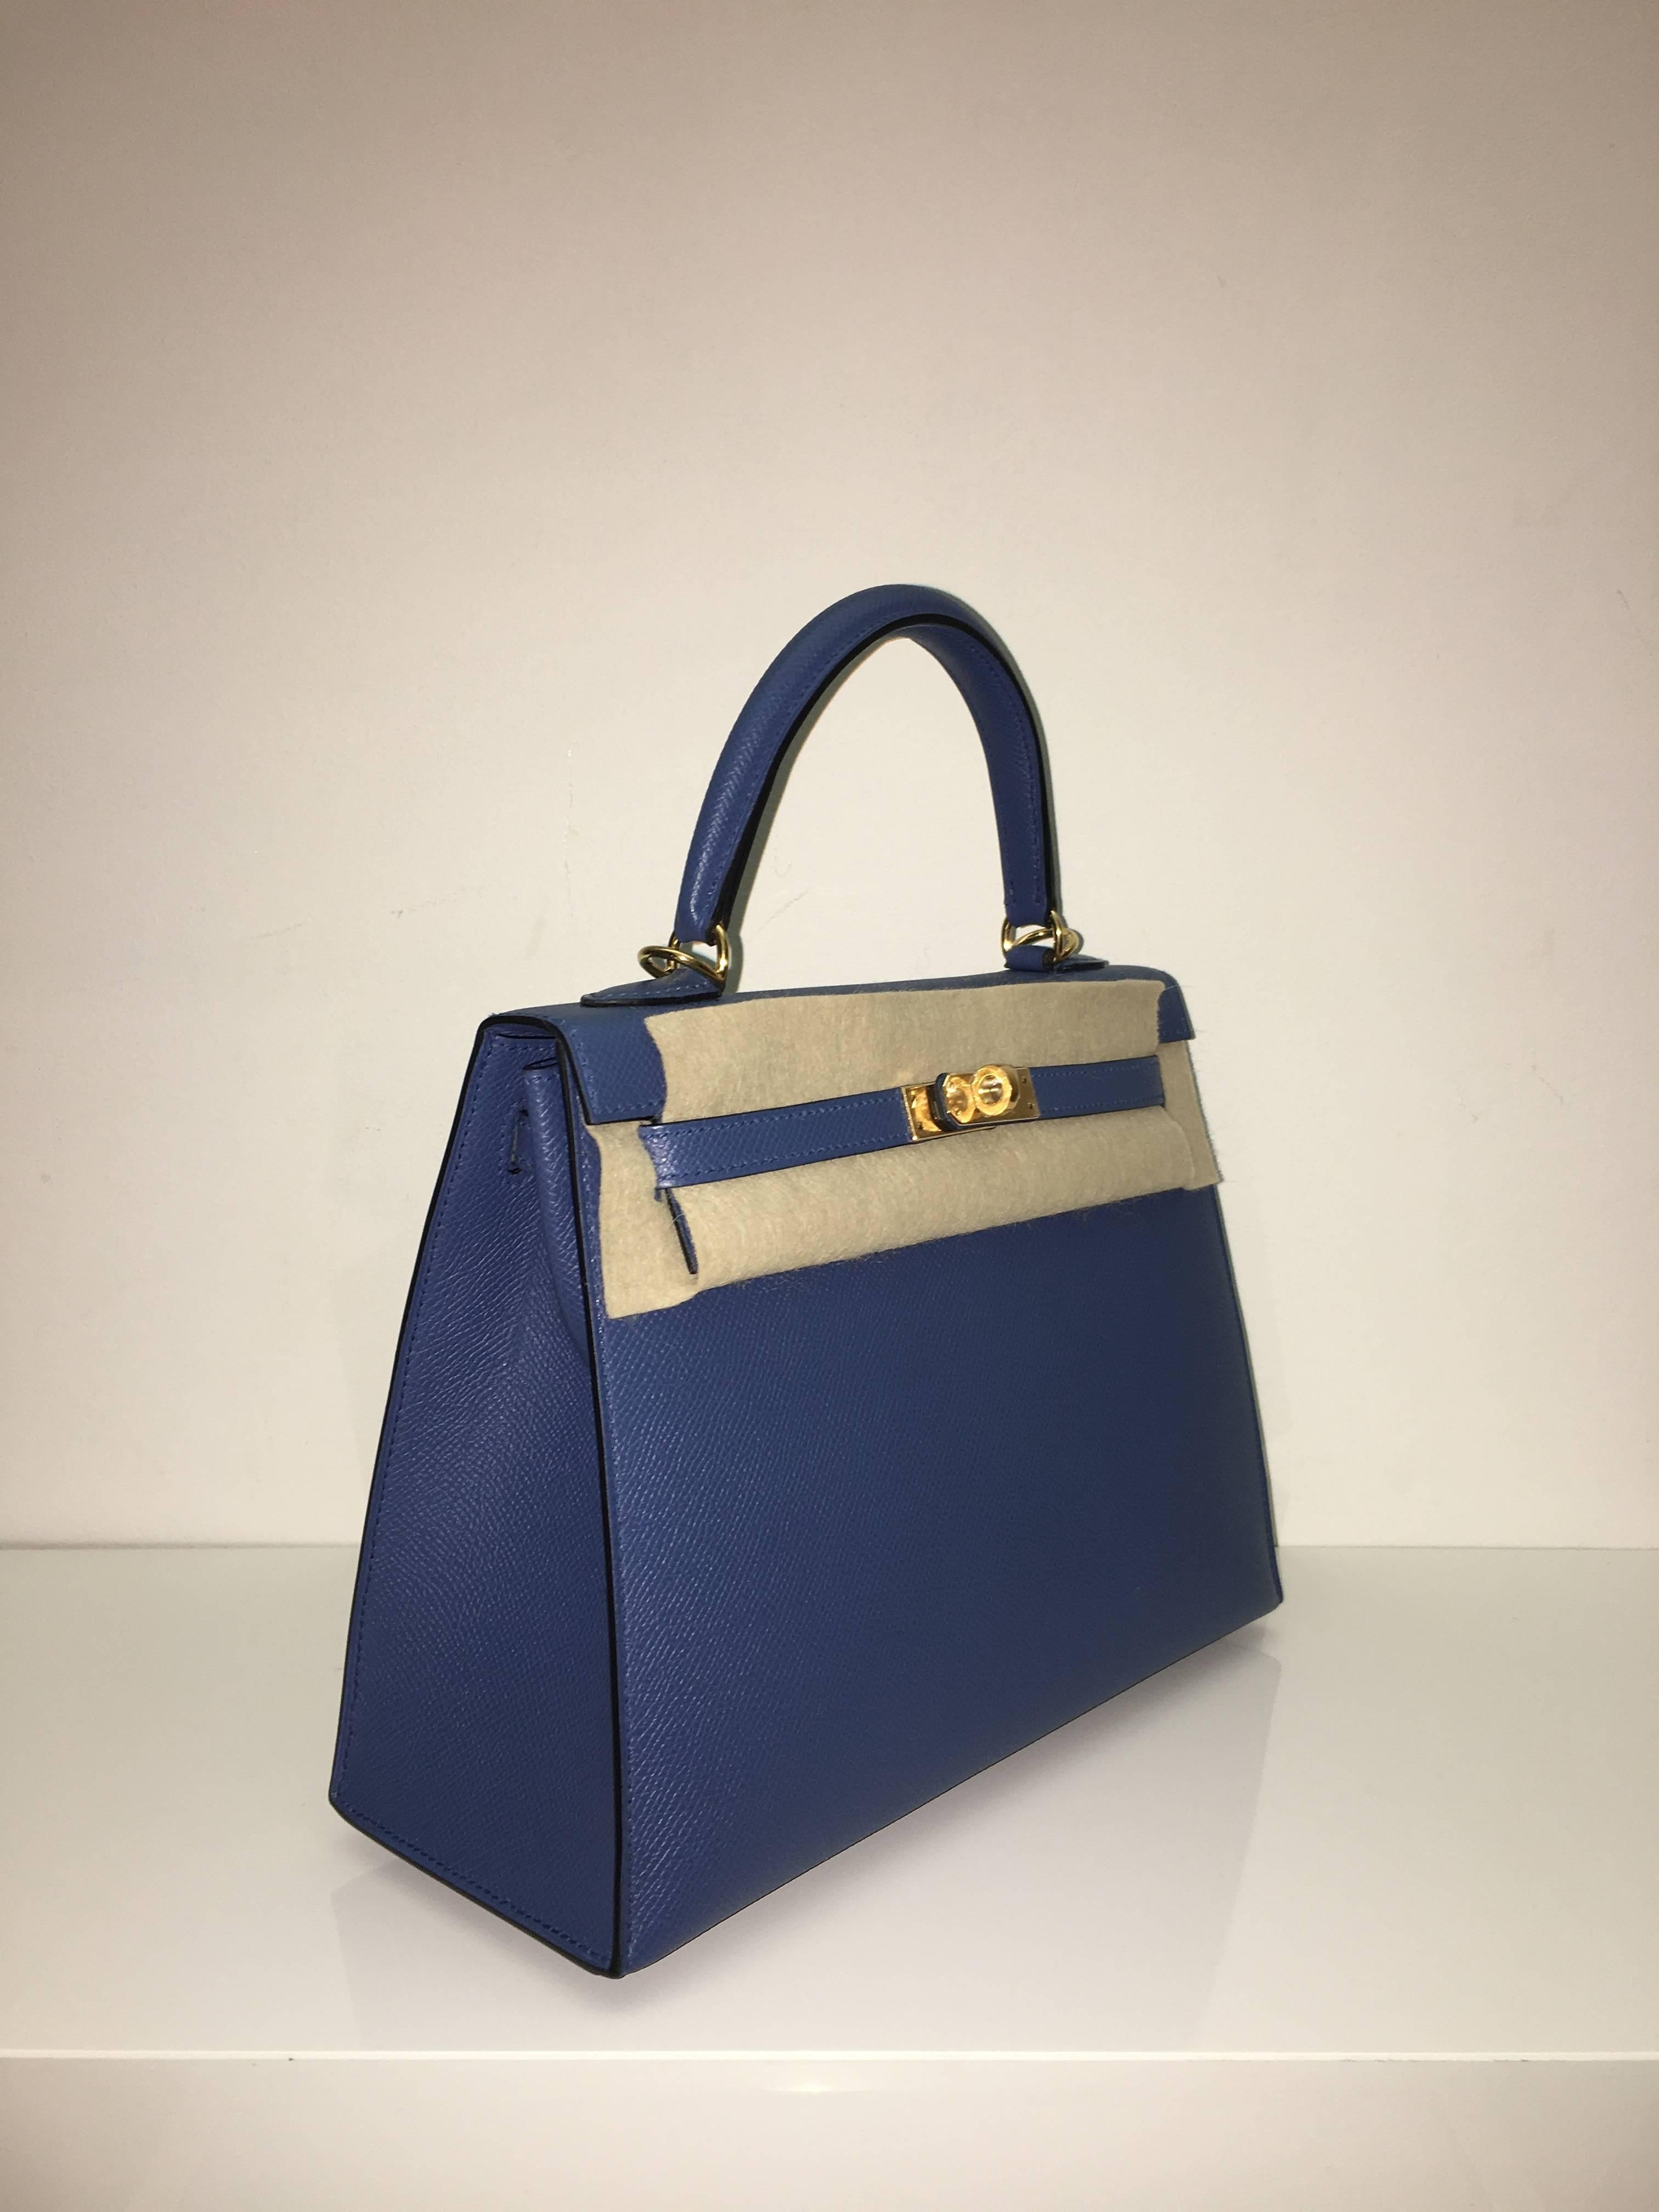 Hermes 
Kelly Sellier Size 25
Epsom Leather 
Colour Blue Agate
Gold Hardware 
store fresh, comes with receipt and full set (dust bag, box...) 
Hydeparkfashion specializes in sourcing and delivering authentic luxury handbags, mainly Hermes, to